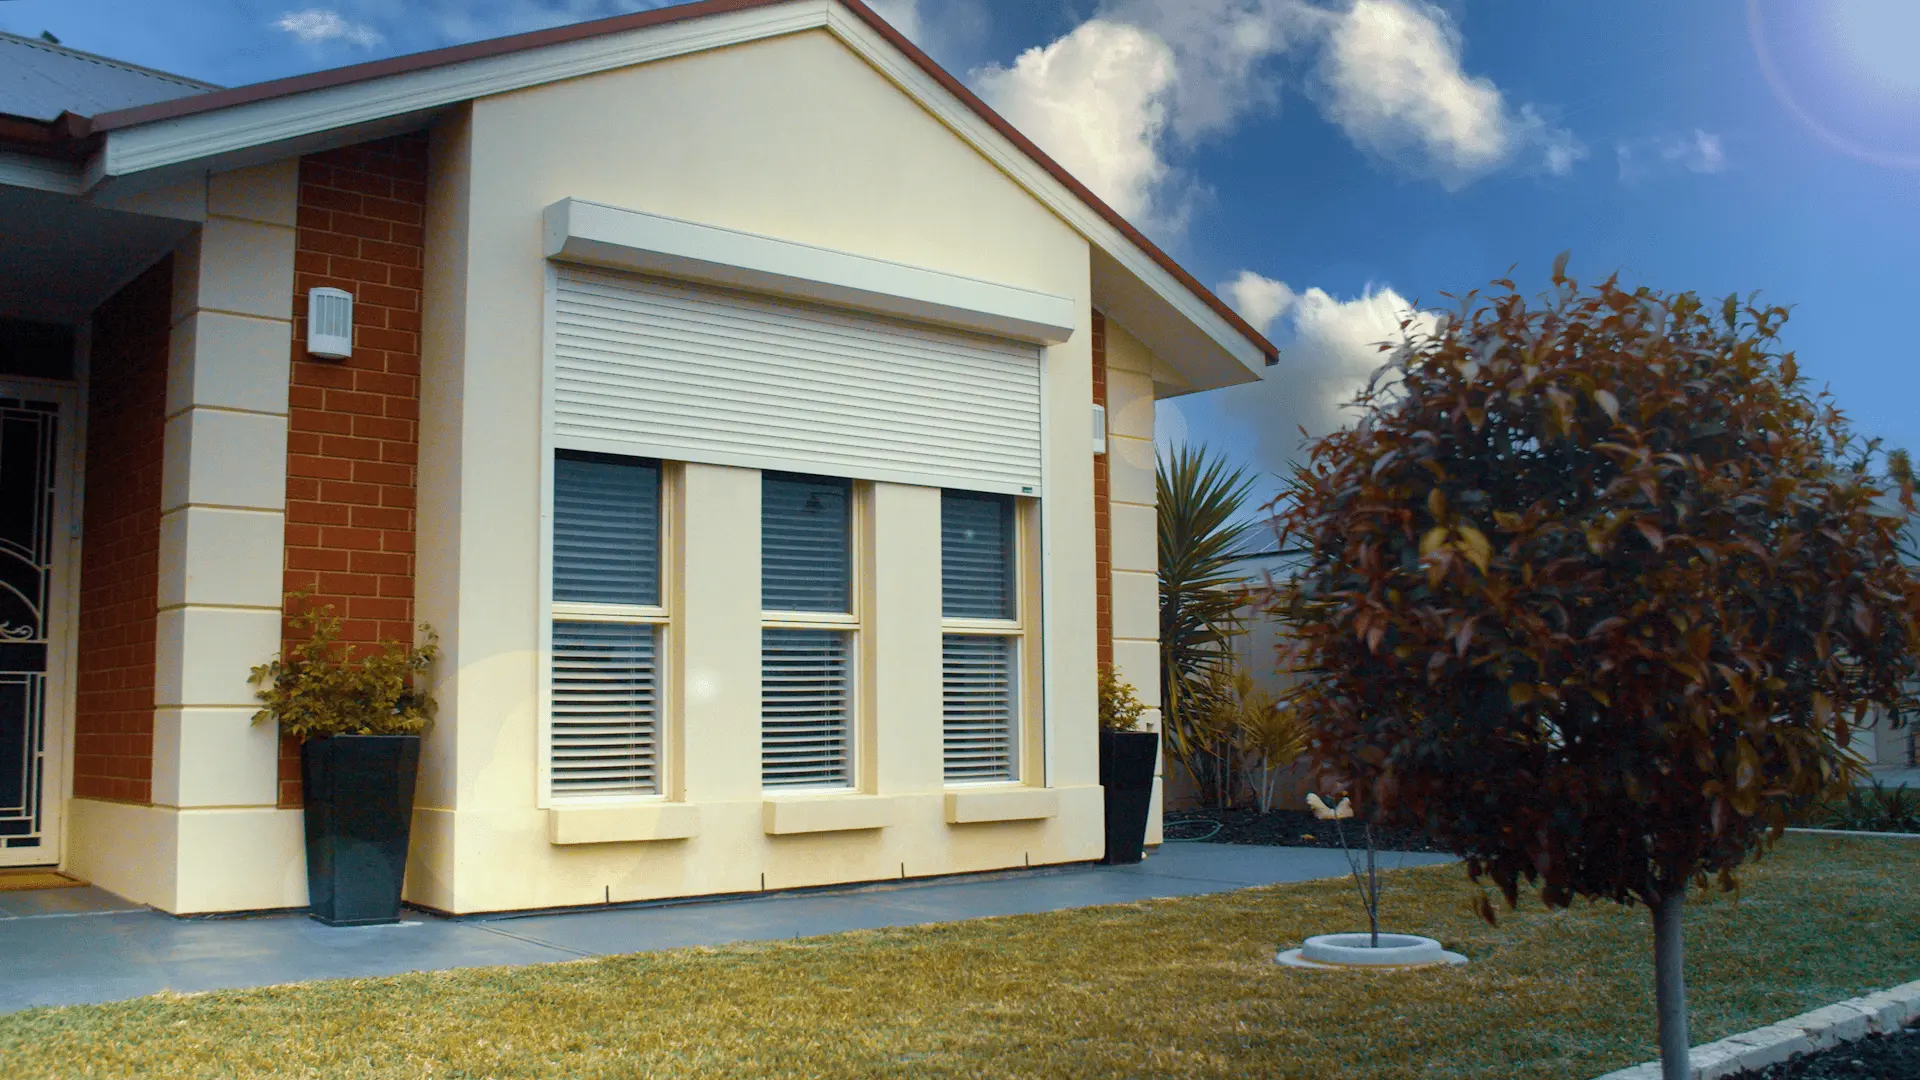 Roller shutters help with noise reduction